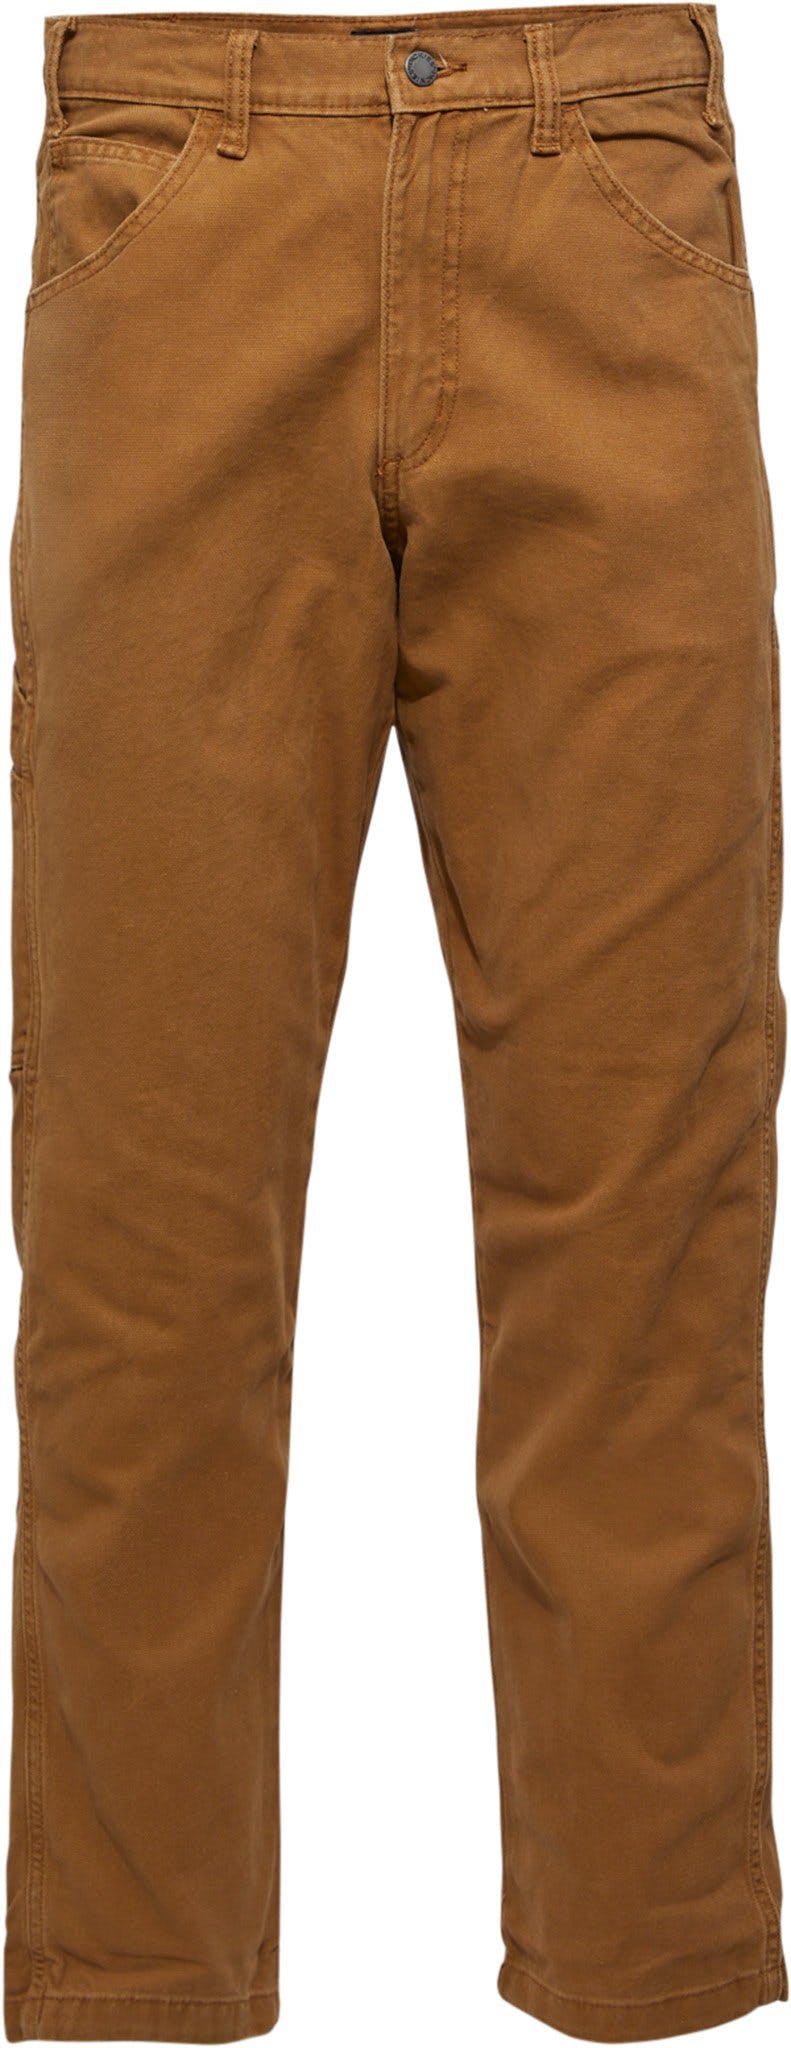 Product image for Stonewashed Duck Carpenter Pants - Men's